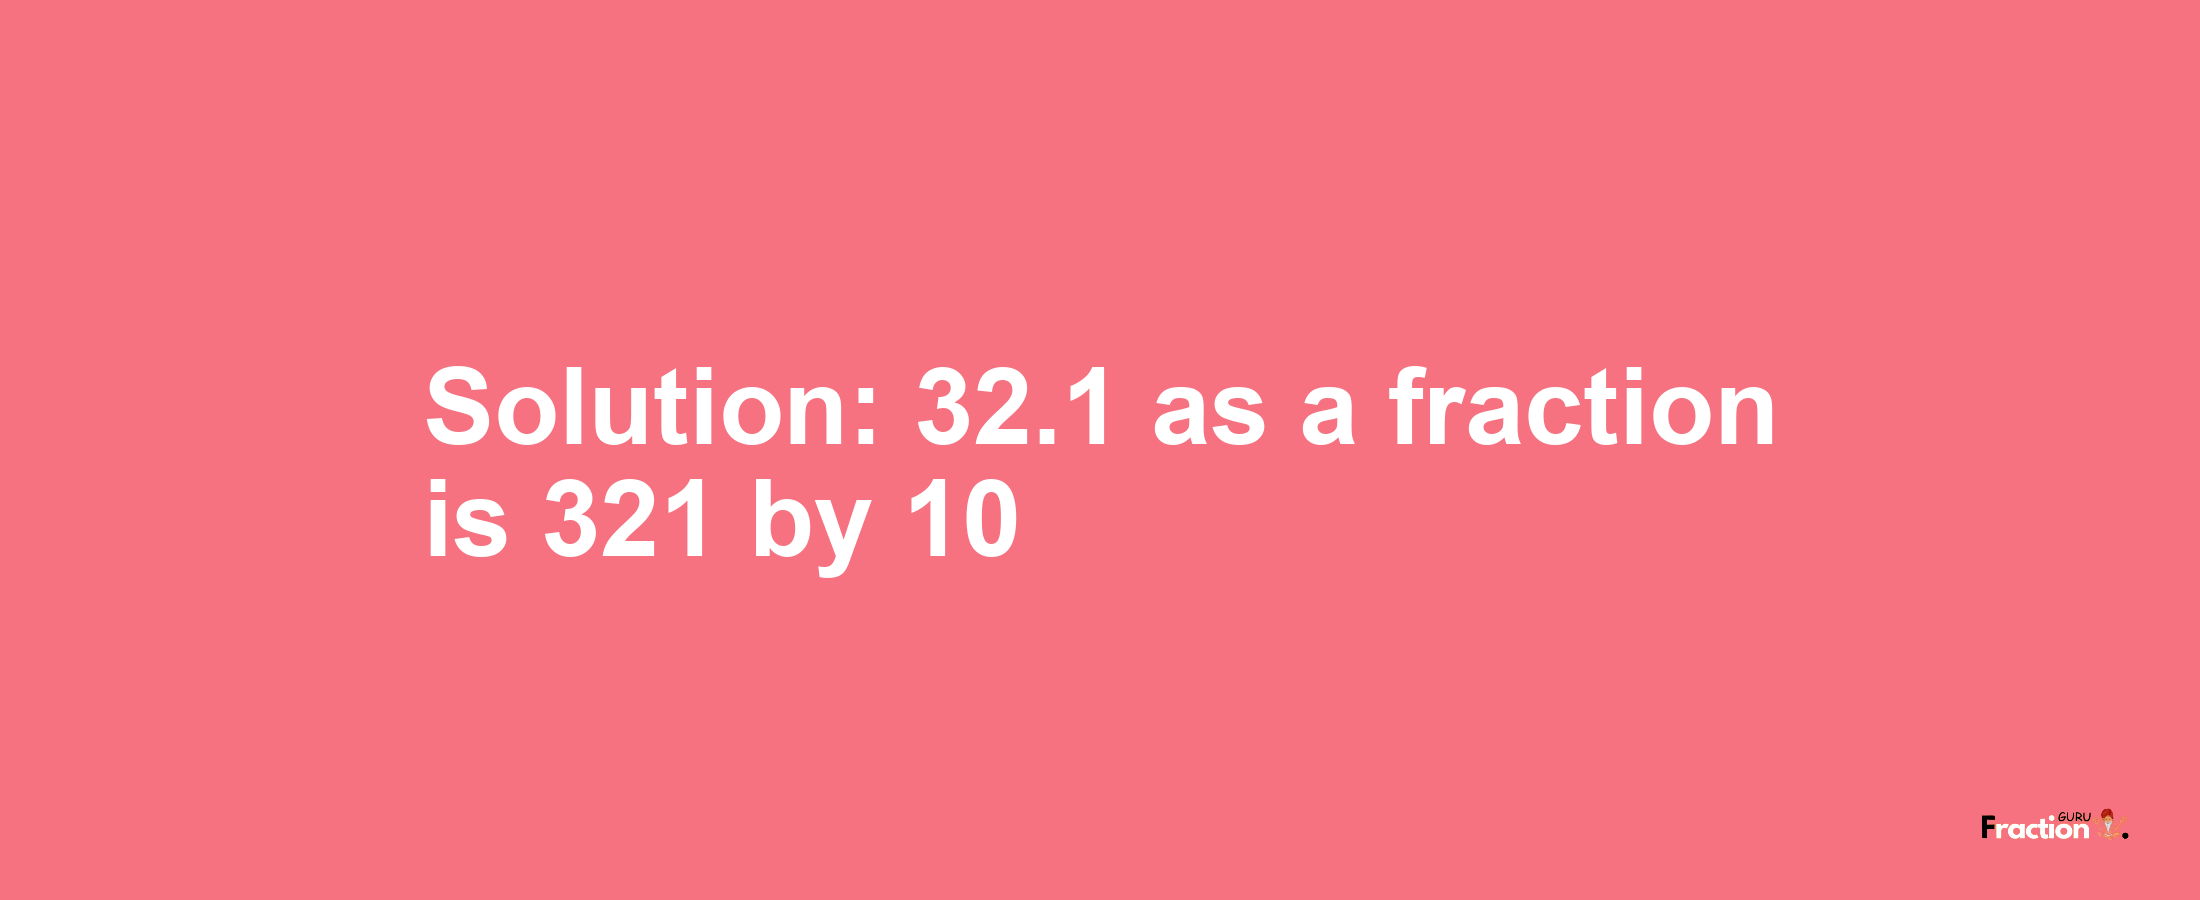 Solution:32.1 as a fraction is 321/10